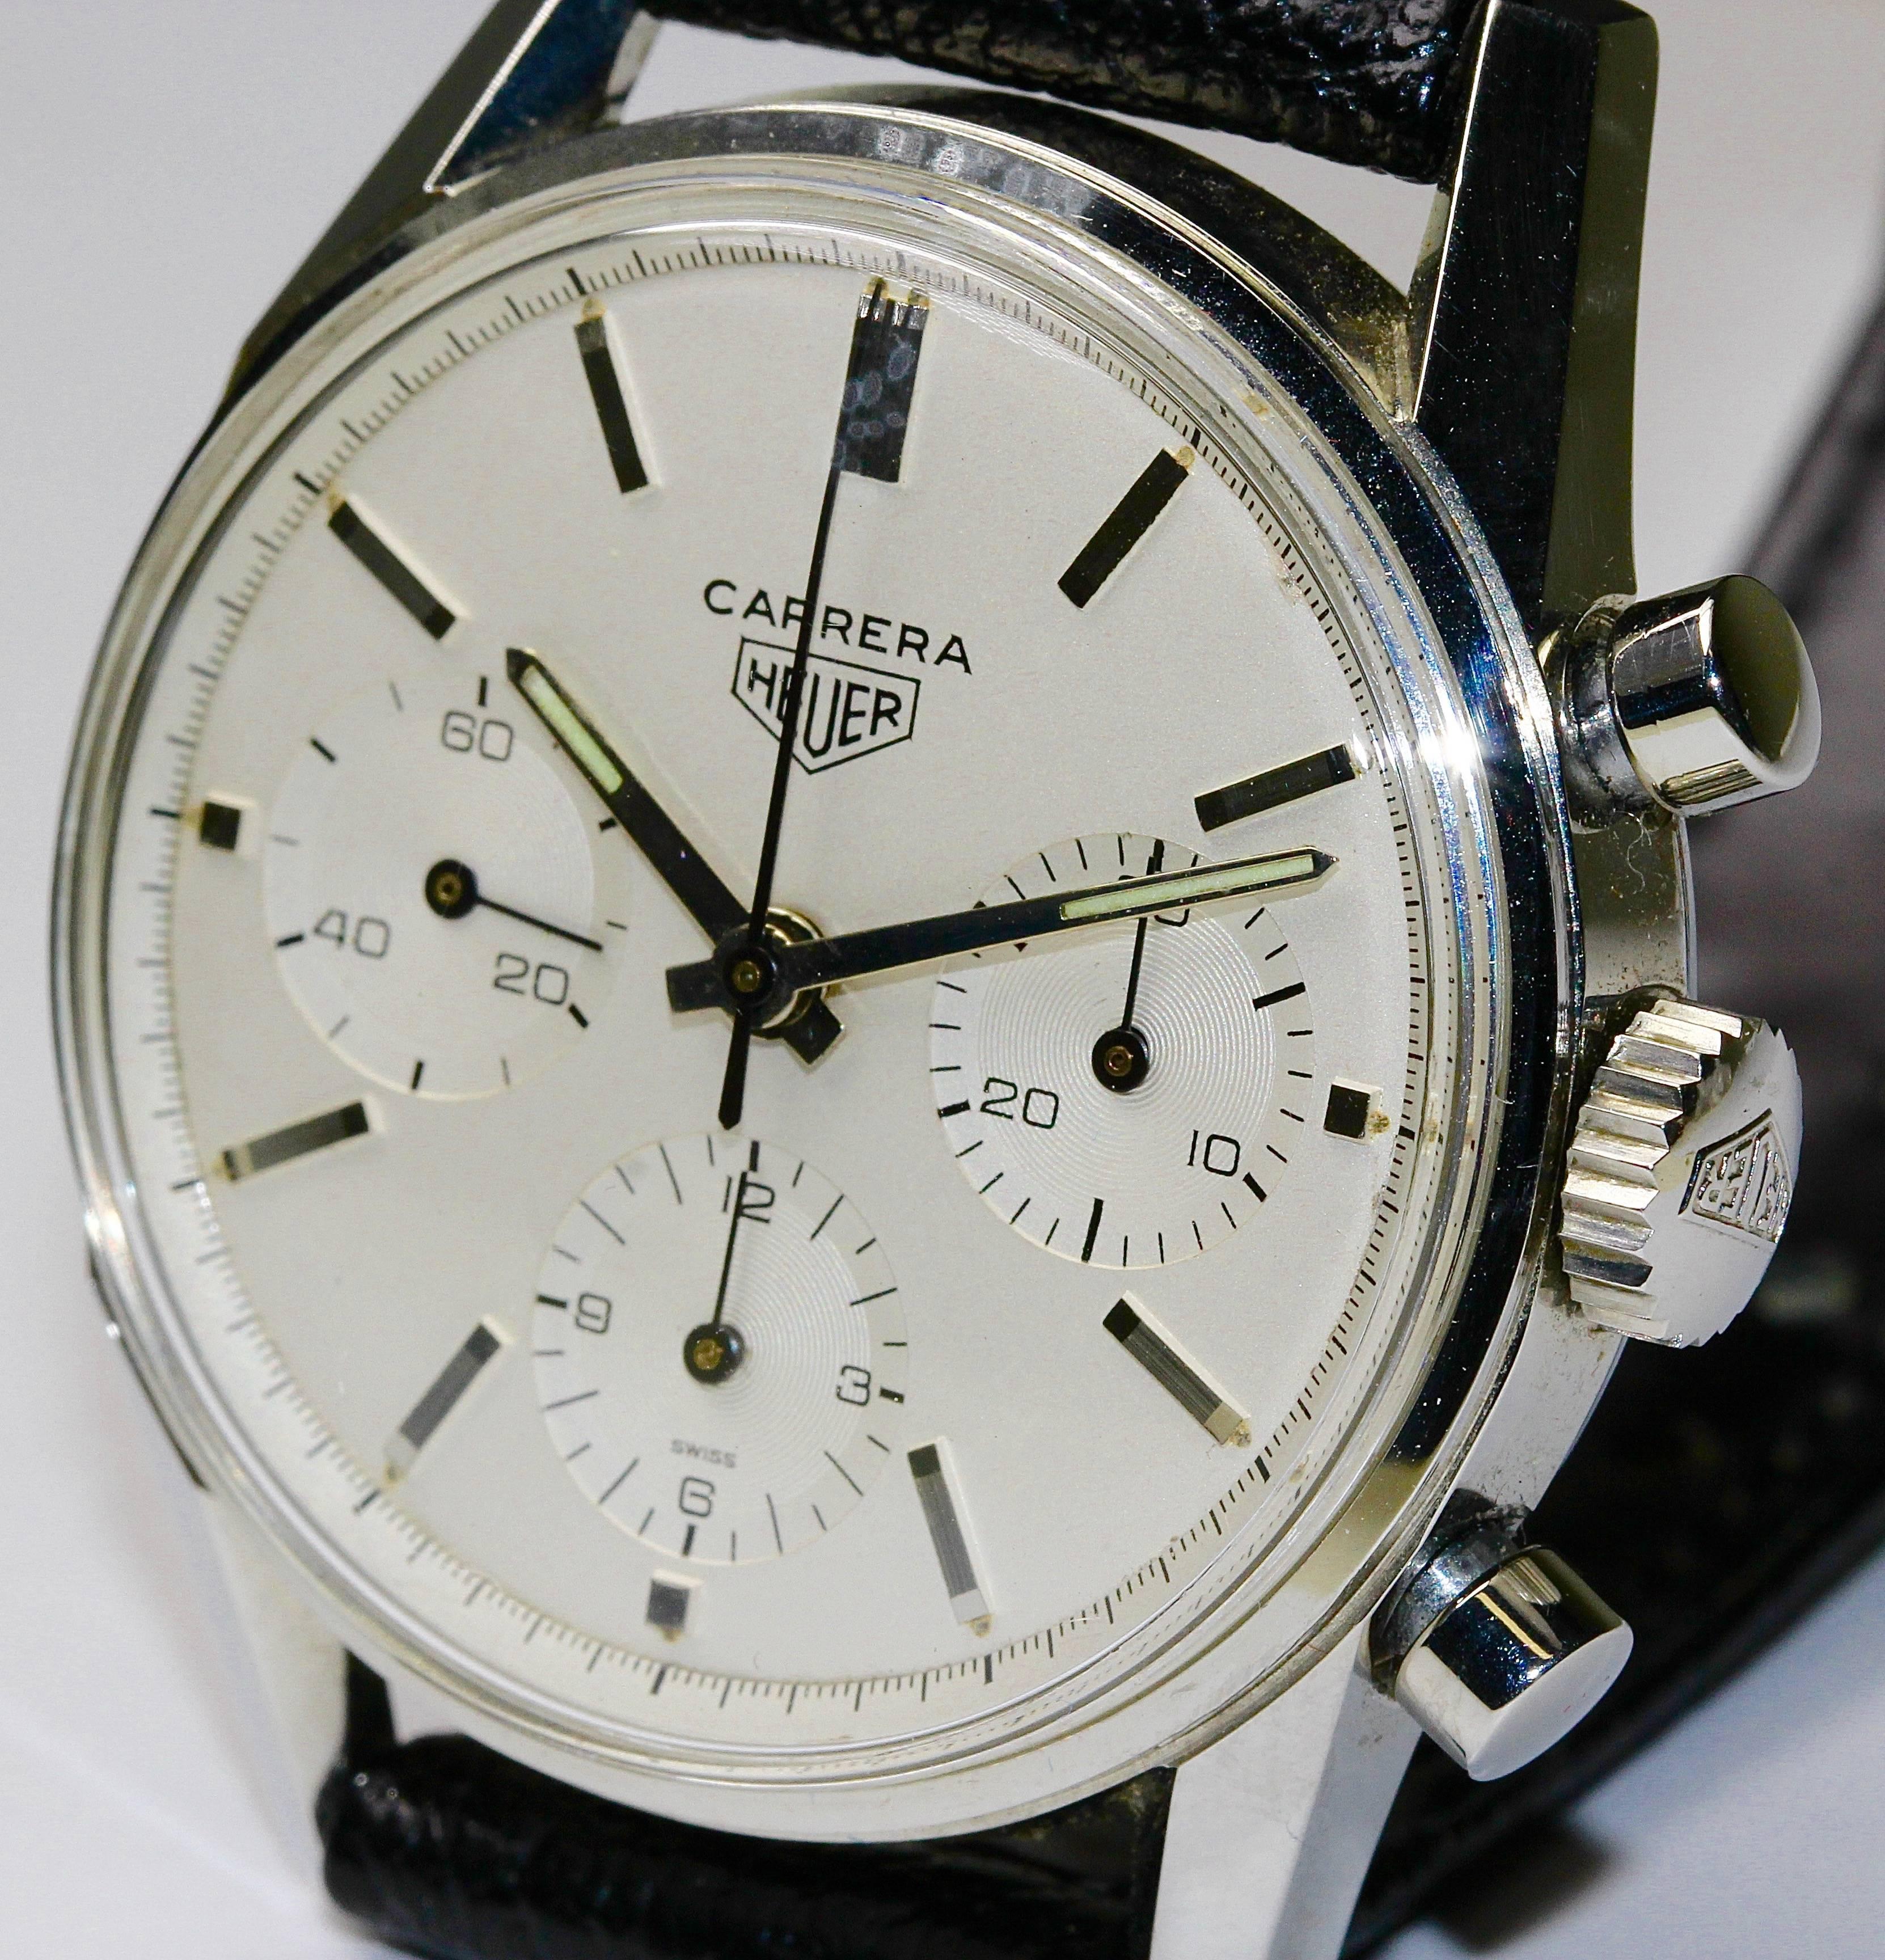 Extremely rare HEUER Carrera Eggshell Chronograph. Ref. 2447s. 
A similar watch was auctioned a few months ago at Phillips for 30,000, - CHF.
Absolute collector's item. From first owner. For condition please take the photos. Watch can be raised and